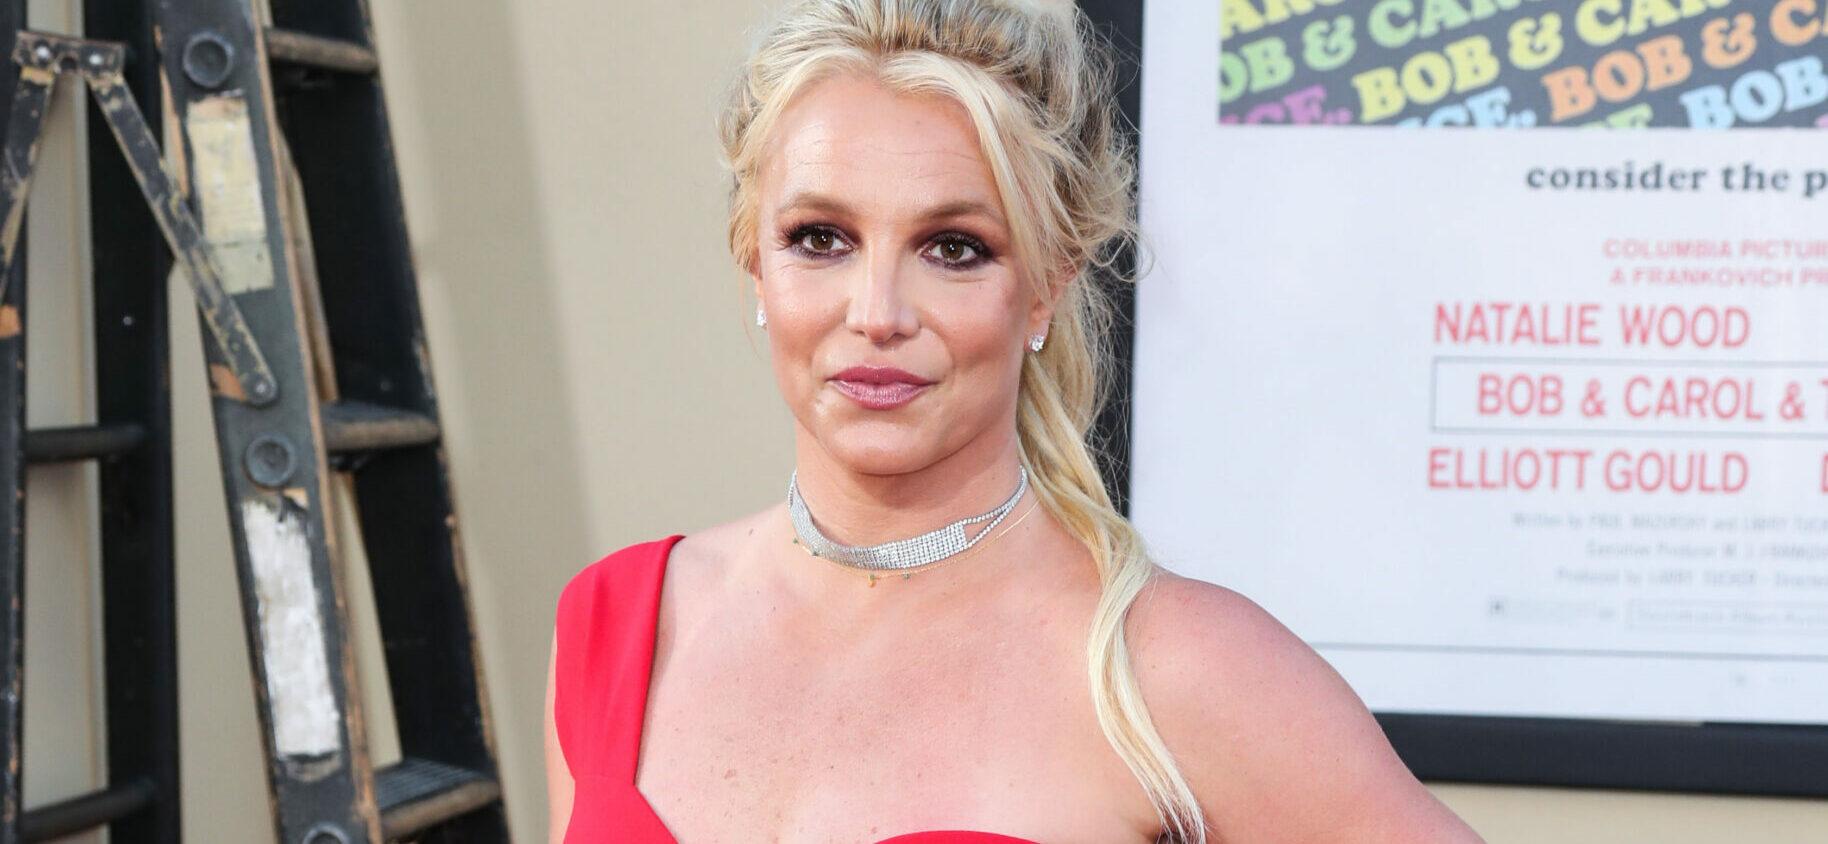 Britney Spears Is ‘Grateful’ Despite ‘Too Much War And Hate In The World’